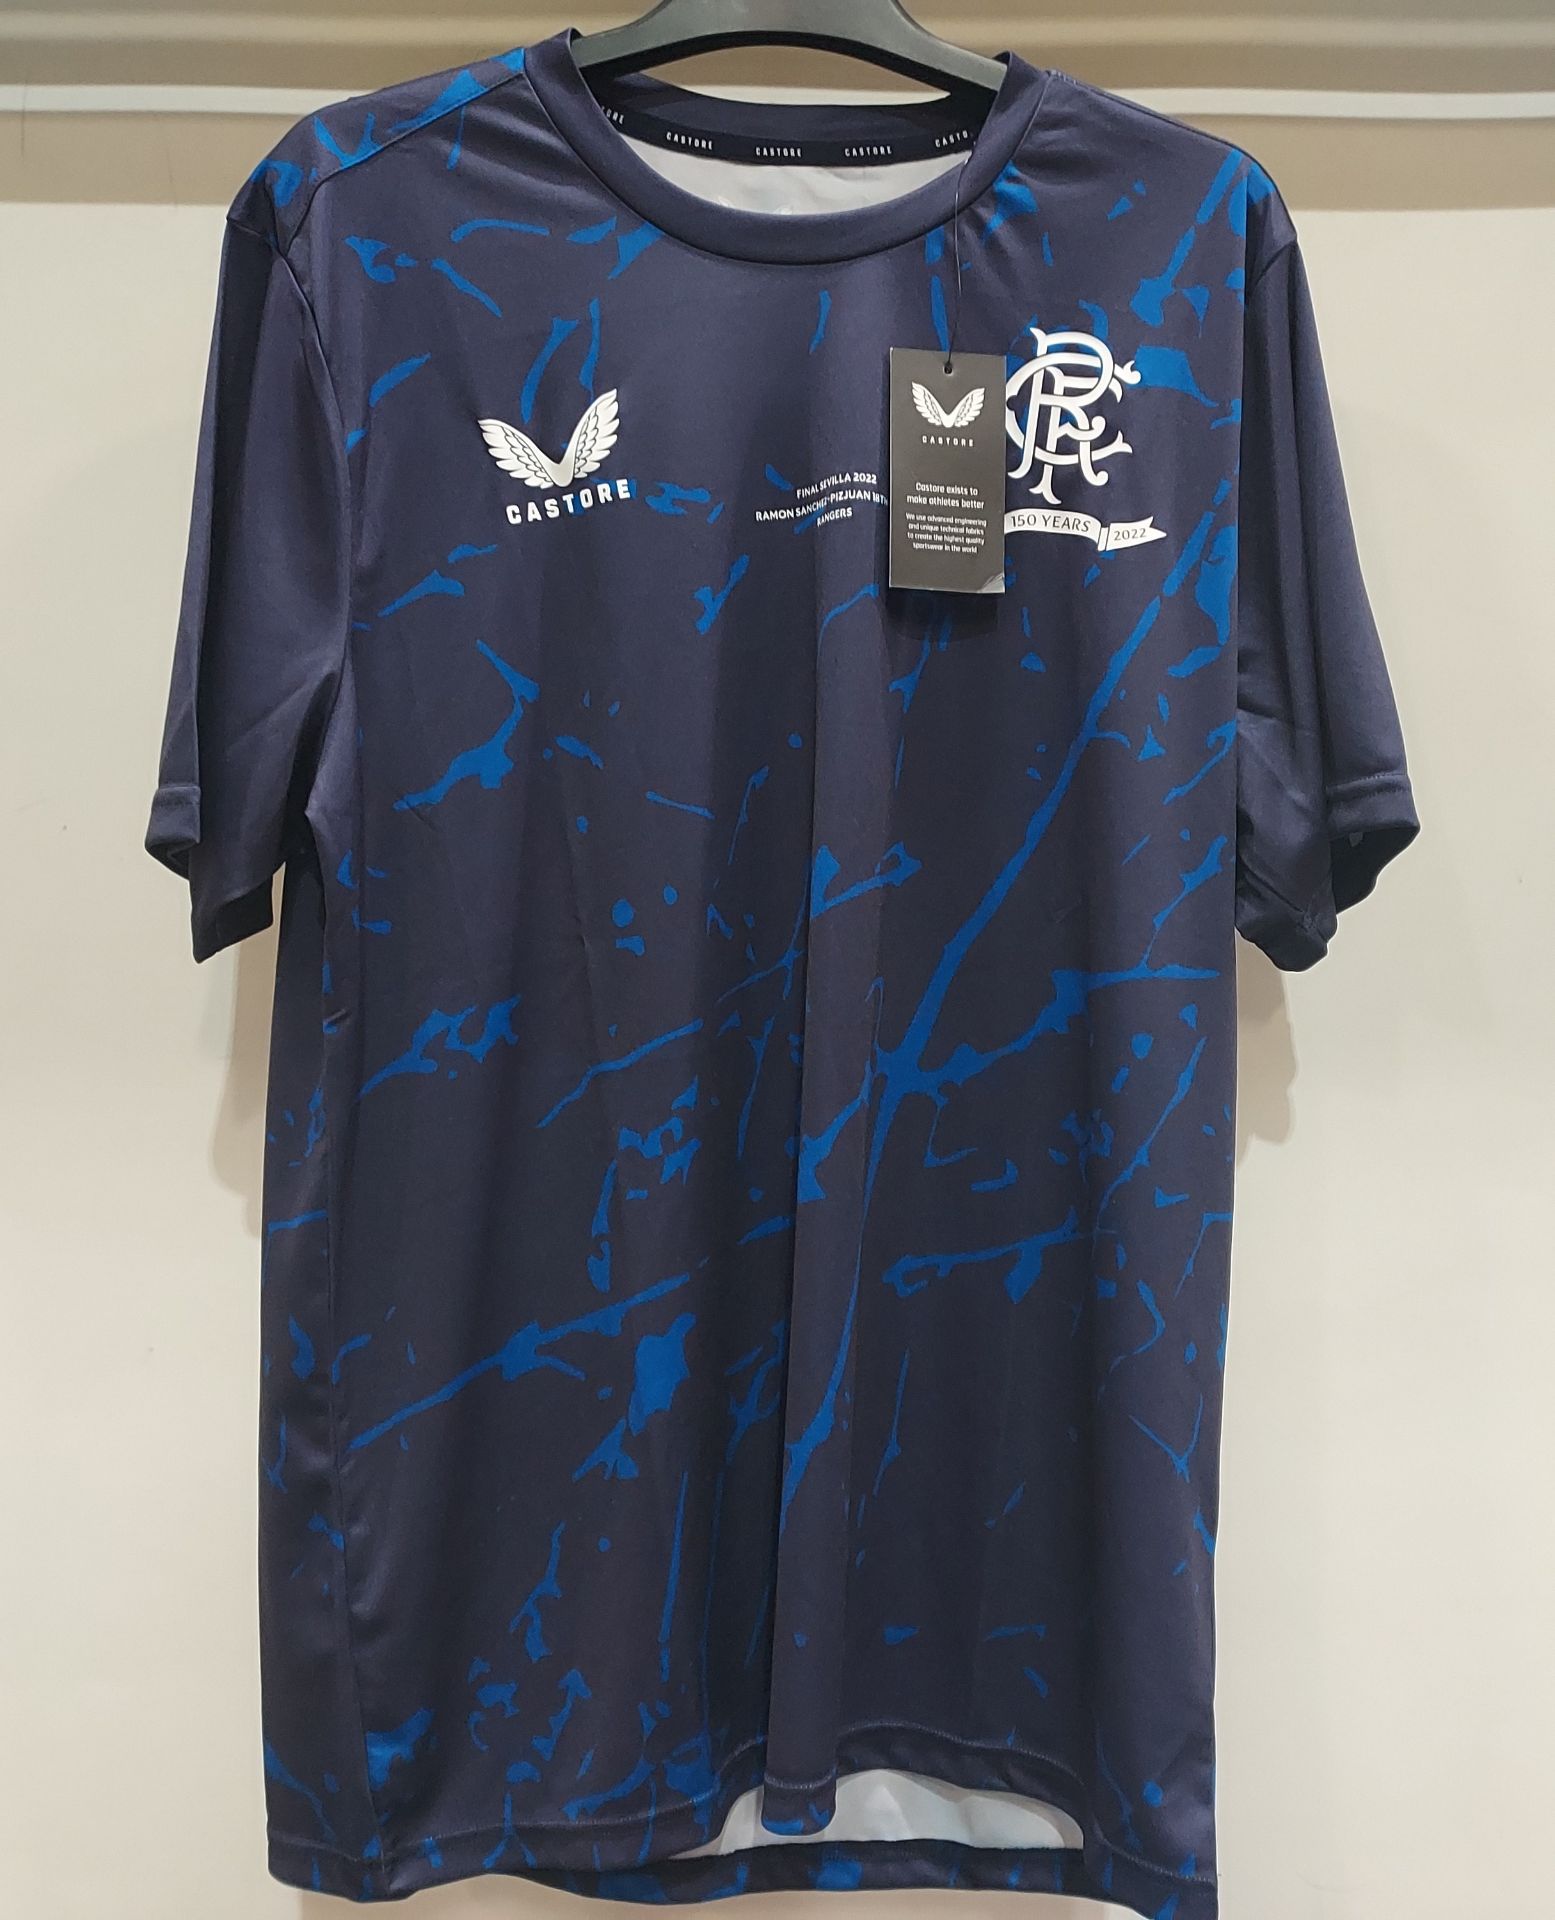 22 X BRAND NEW RANGERS FC CASTORE T SHIRTS IN NAVY SIZE XL